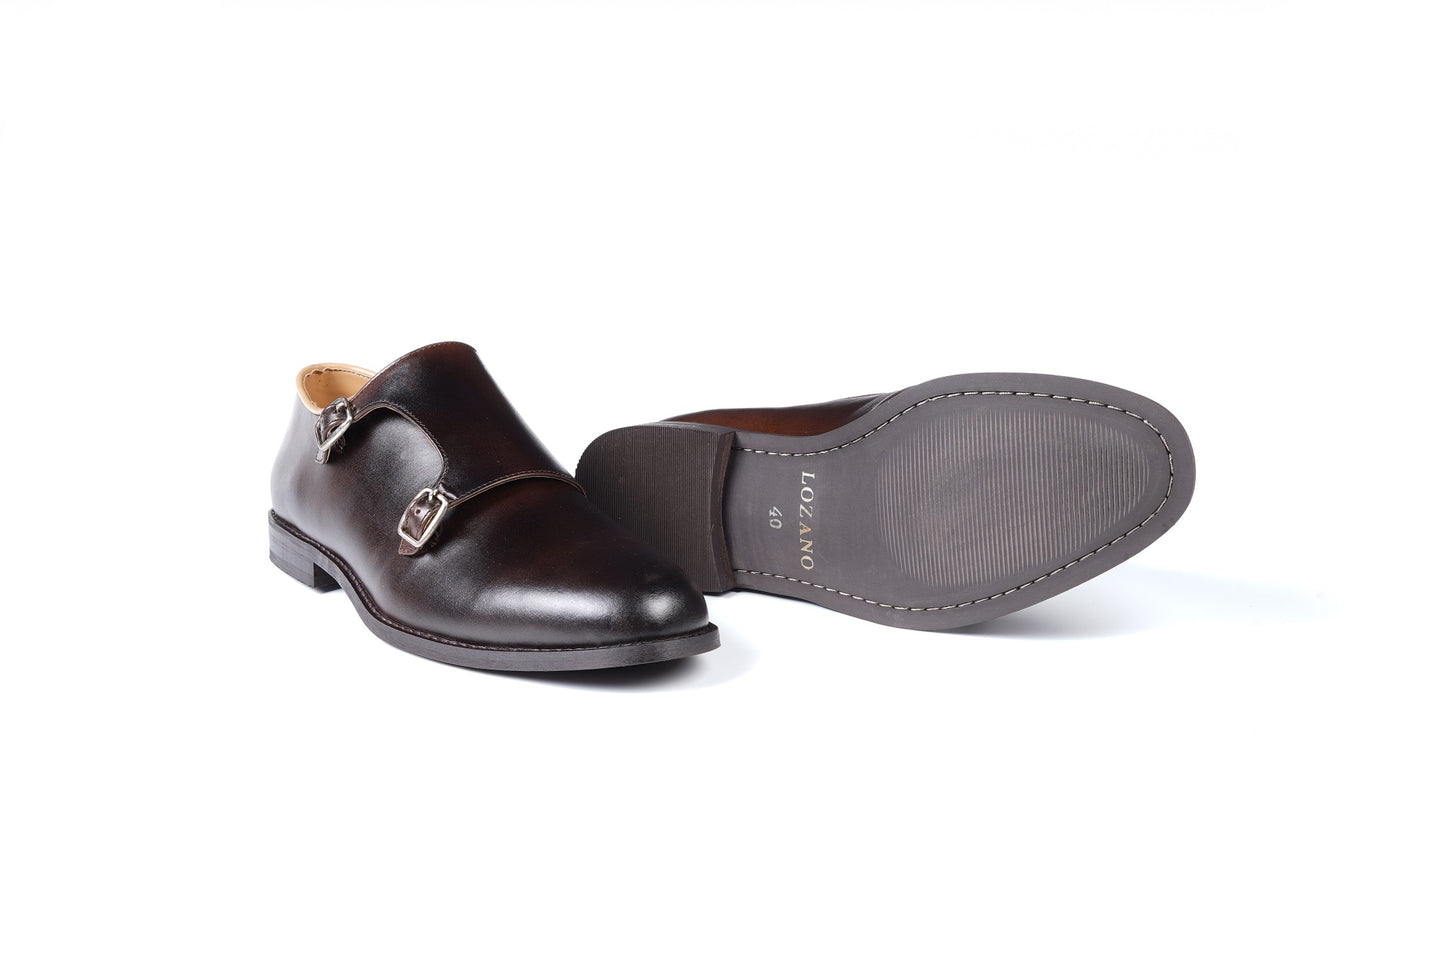 DOUBLE MONK STRAPS - BROWN